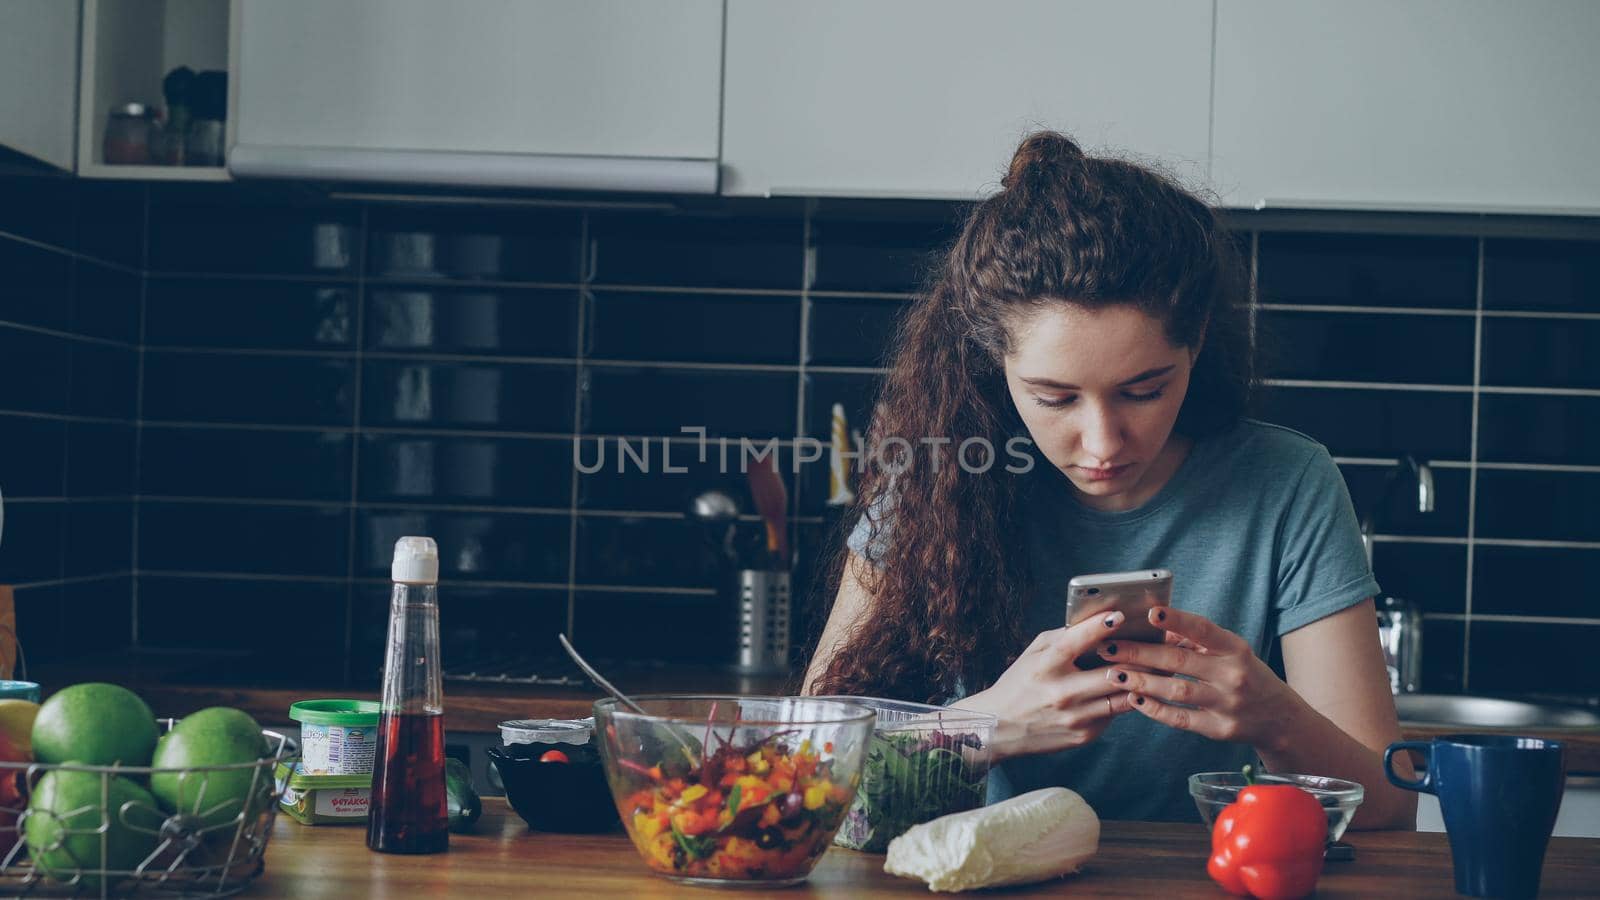 Portrait of young beautiful caucasian woman sitting at table in modern lighty spacious kitchen,using smartphone, texting, plates with food are in front of her